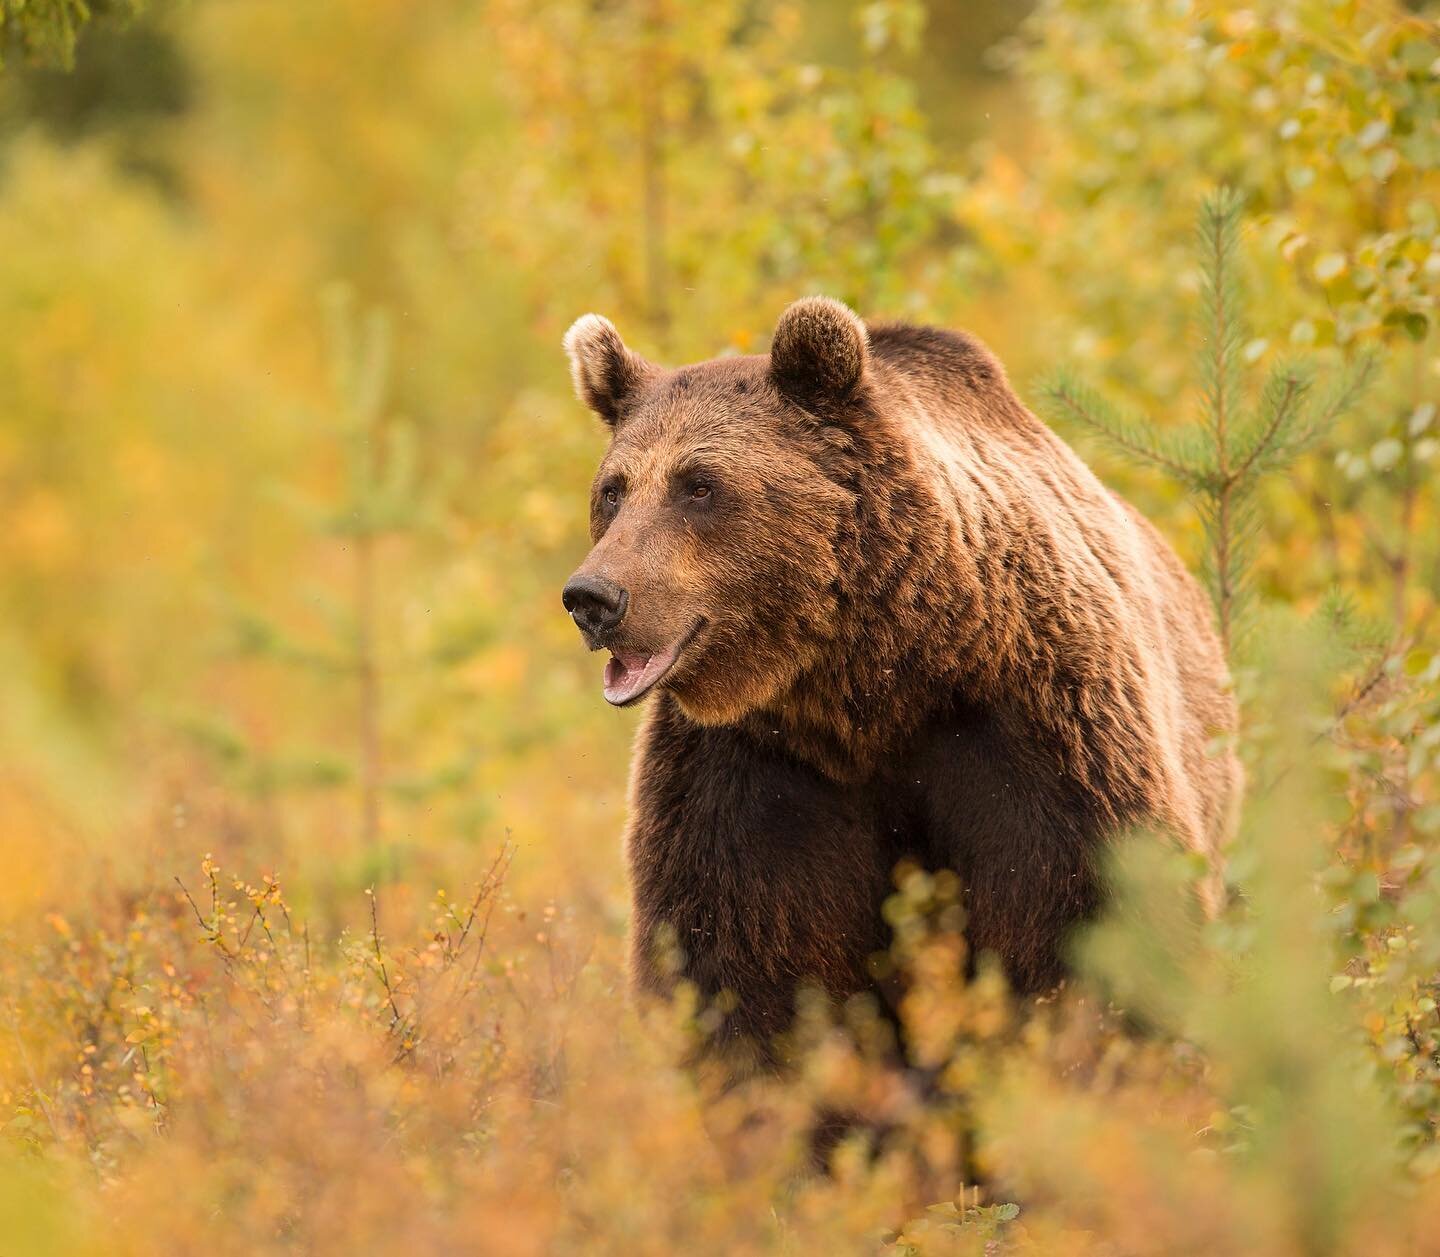 A beautiful male Bear nicknamed Yogi, and some vibrant autumnal surroundings 🧡 Continuing with the recent theme of European Brown Bears, here&rsquo;s an image taken in September 2018. Shot on @canonuk 5D mk3 + 300mm f/2.8 @ f/4.